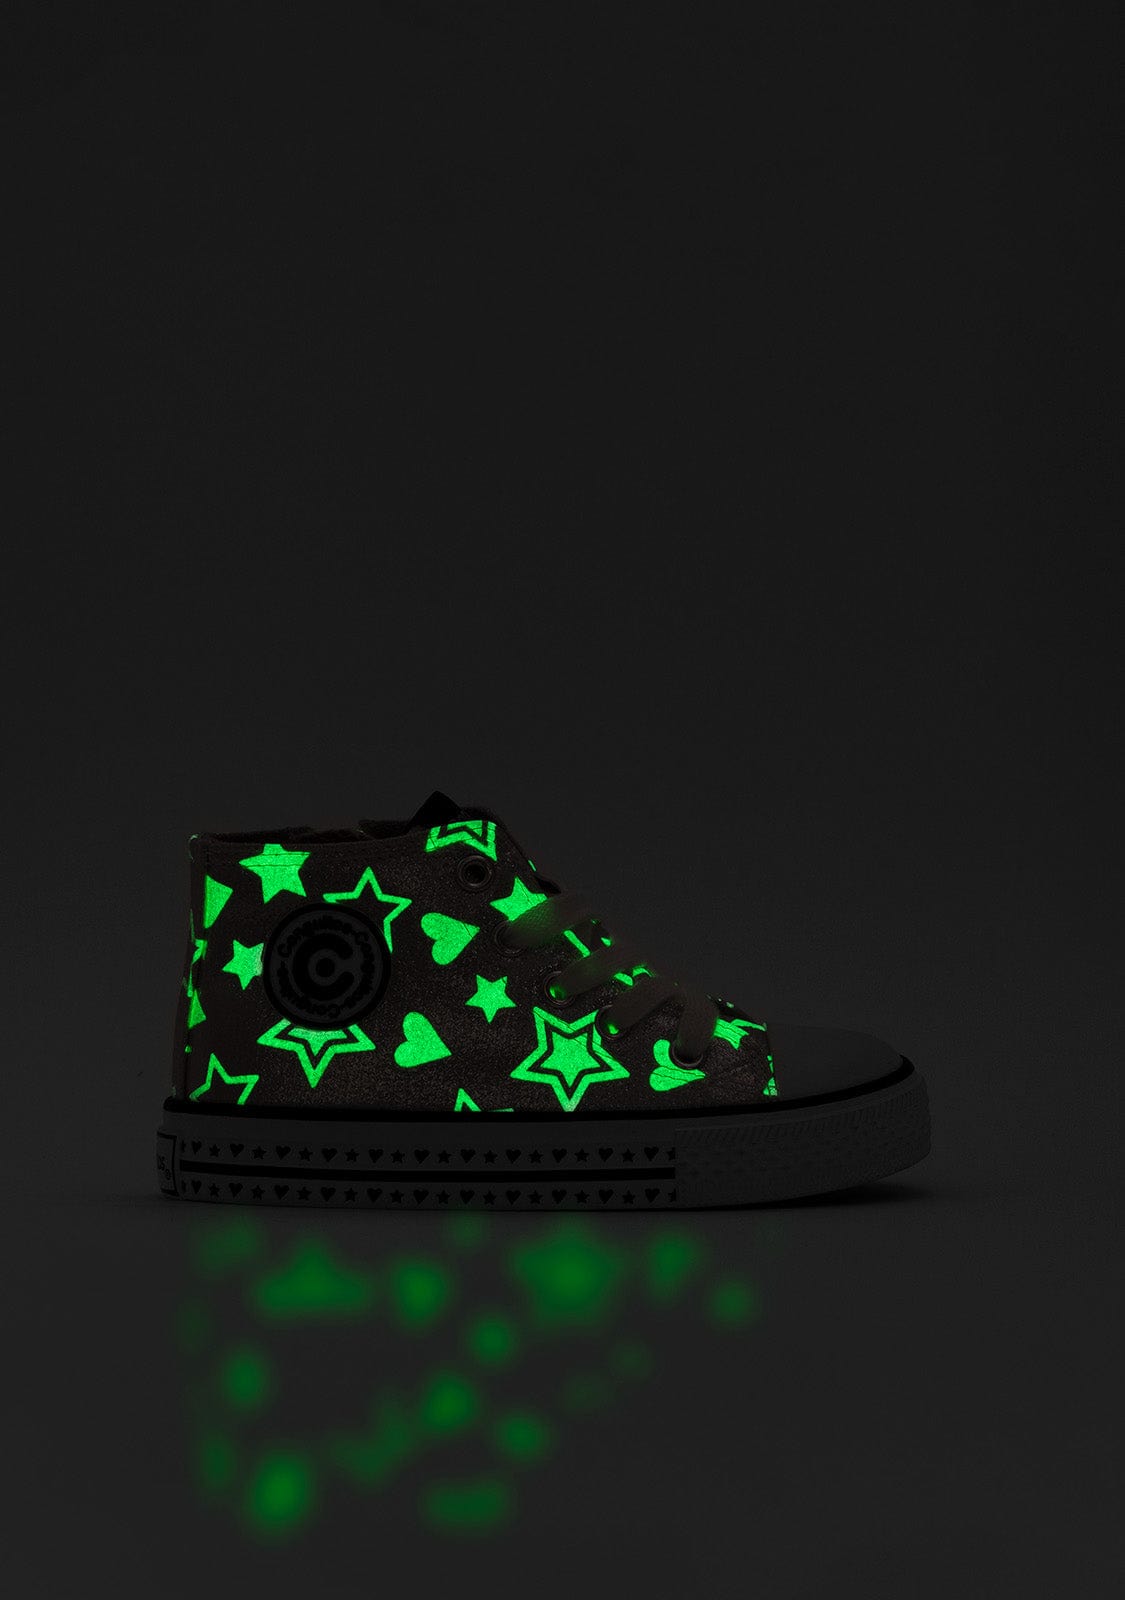 CONGUITOS Shoes Girl's Silver Glows in the Dark High-Top Sneakers